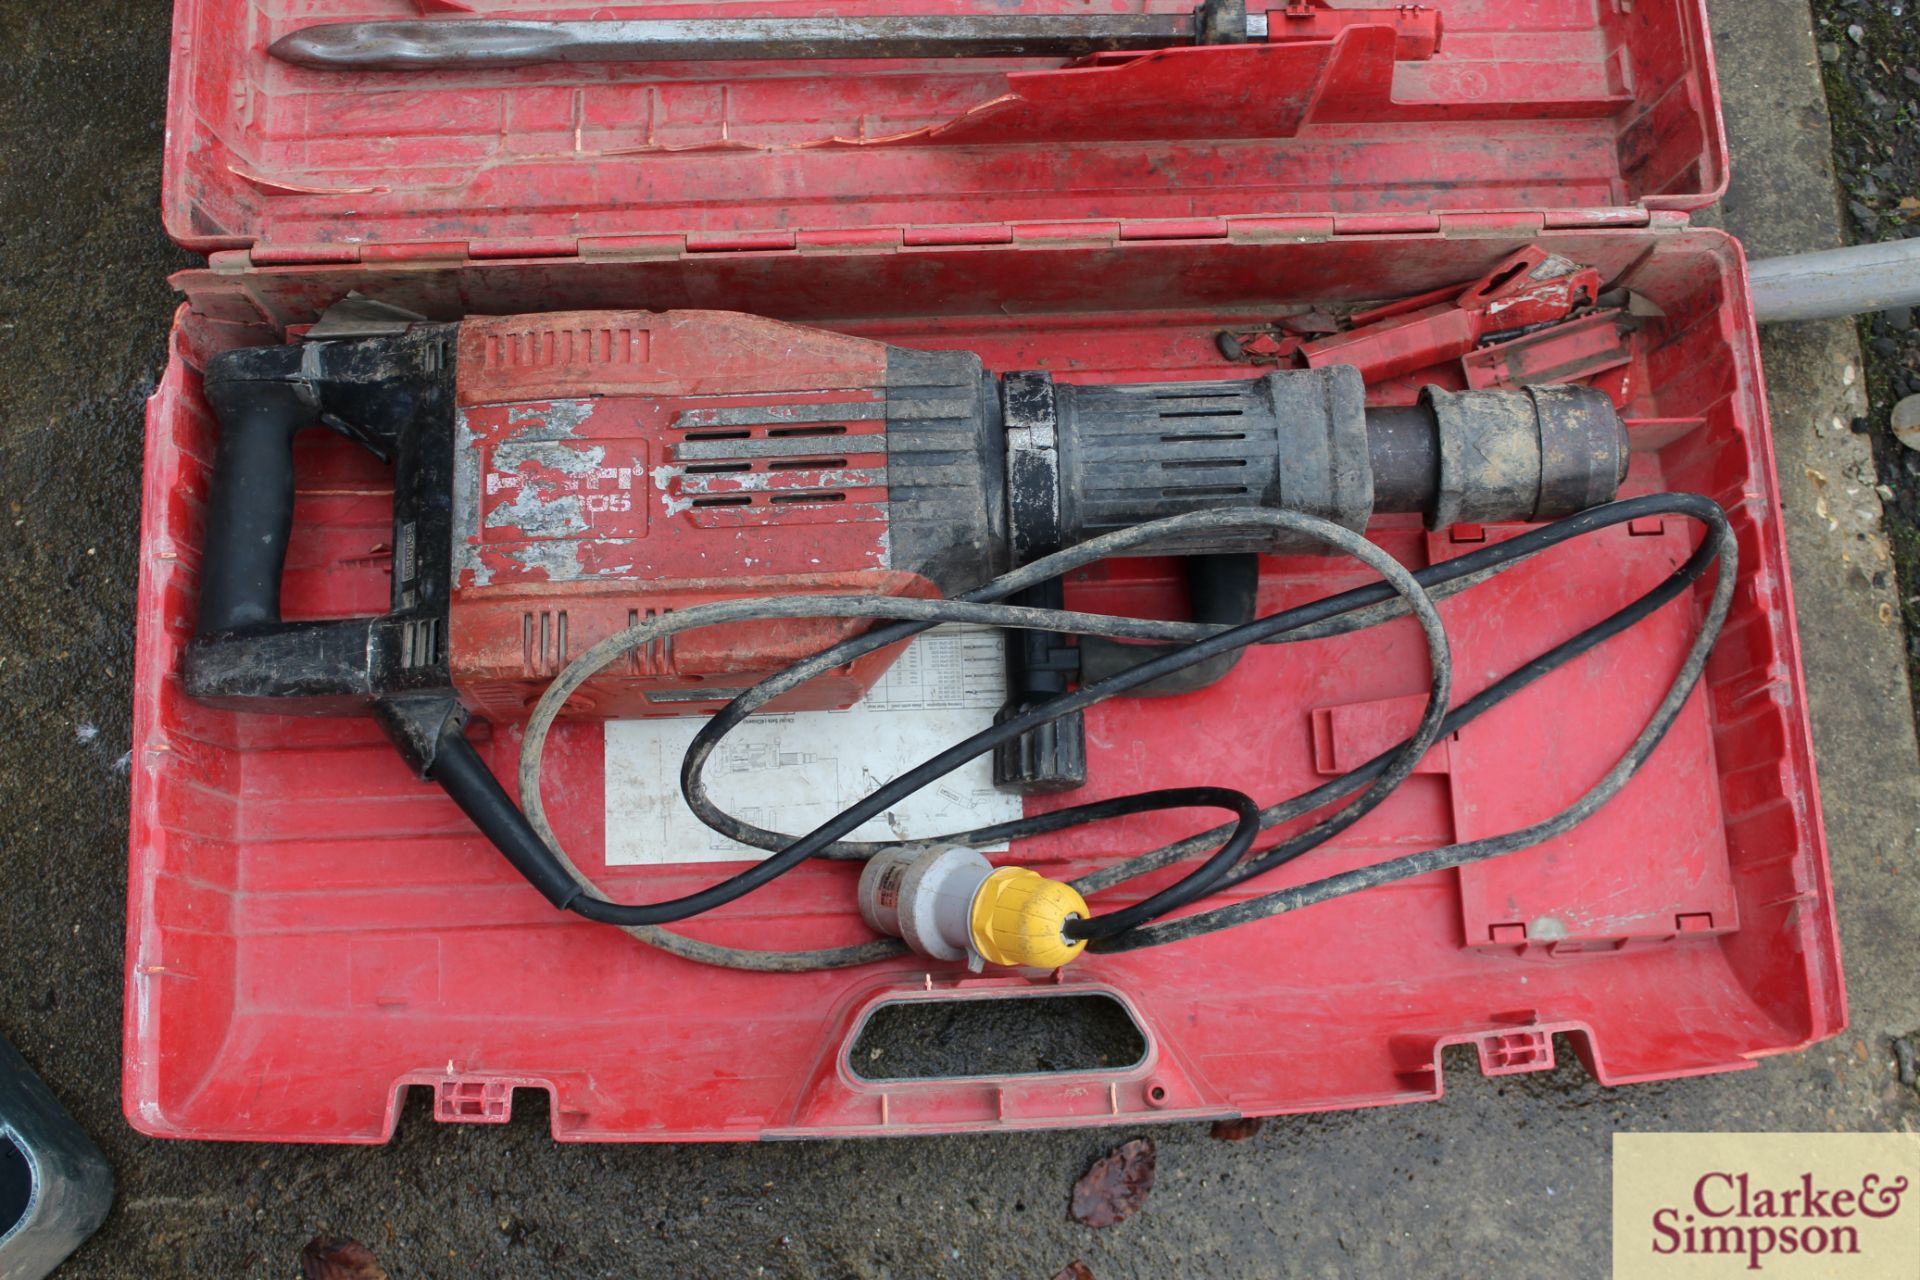 Hilti TE 905-AVR 110V breaker in case with various chisels. Vendor reports this was reconditioned - Image 3 of 6